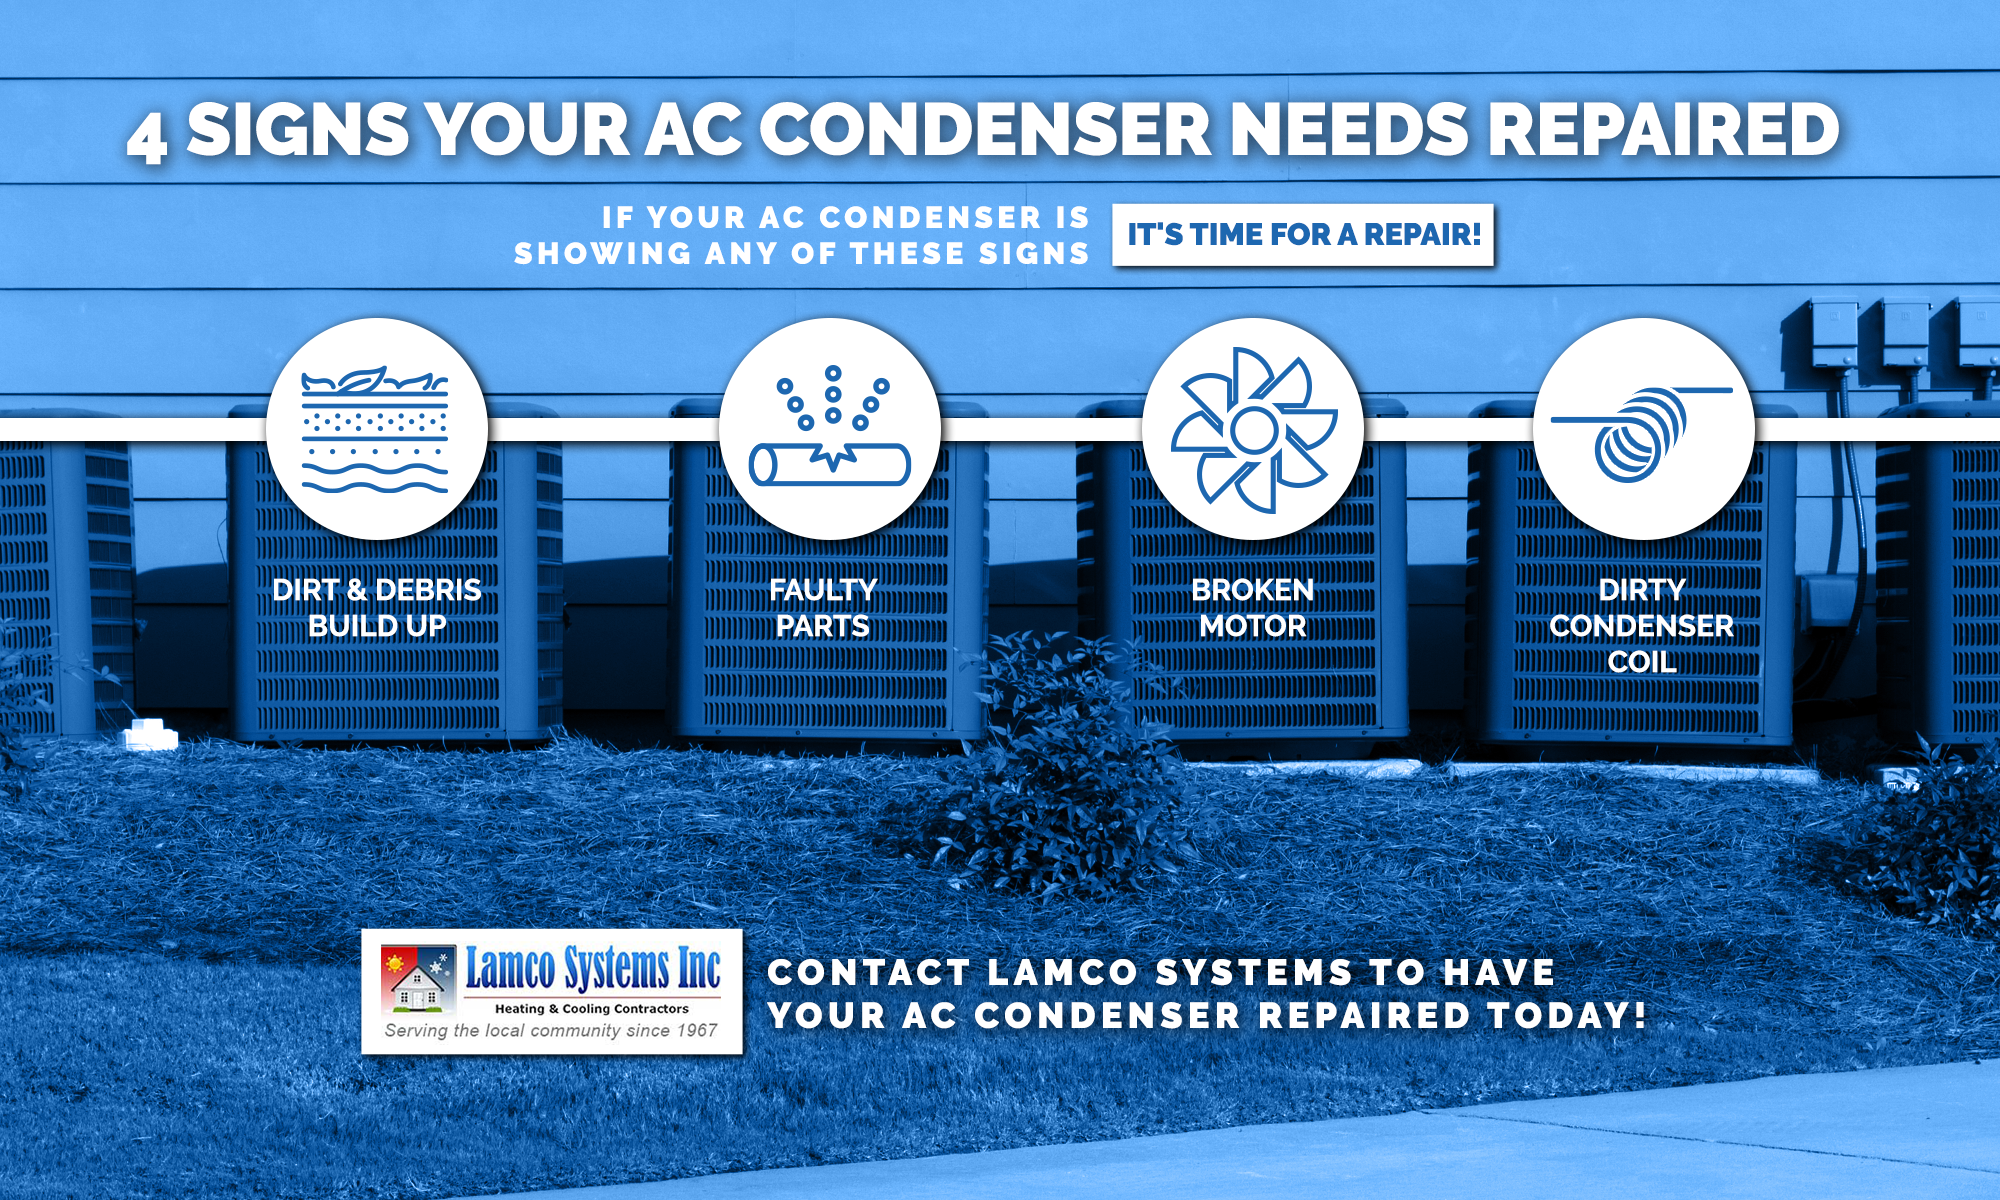 4-Signs-Your-AC-Condenser-Needs-Repaired-5f1b0f4486e70